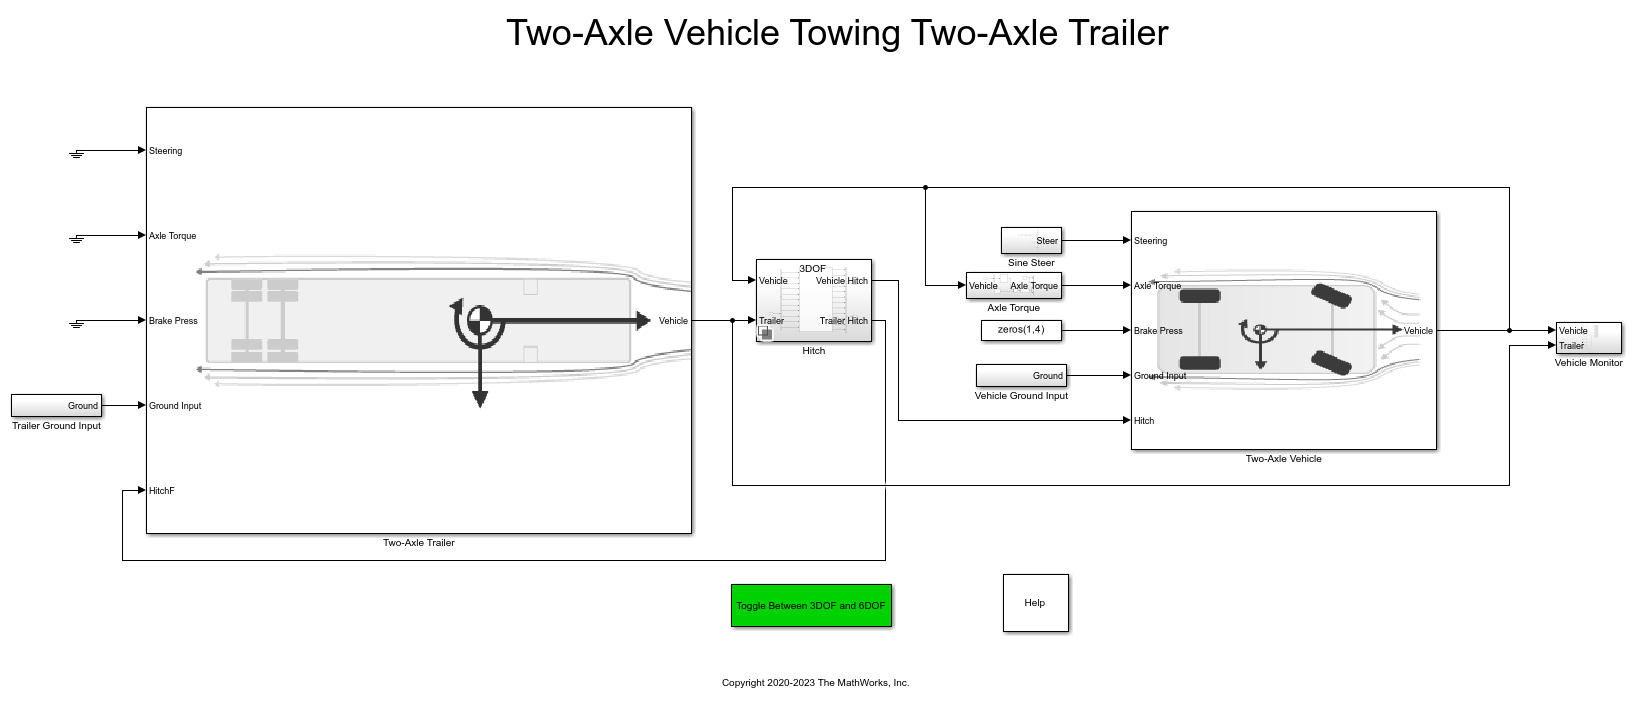 Two-Axle Tractor Towing a Two-Axle Trailer